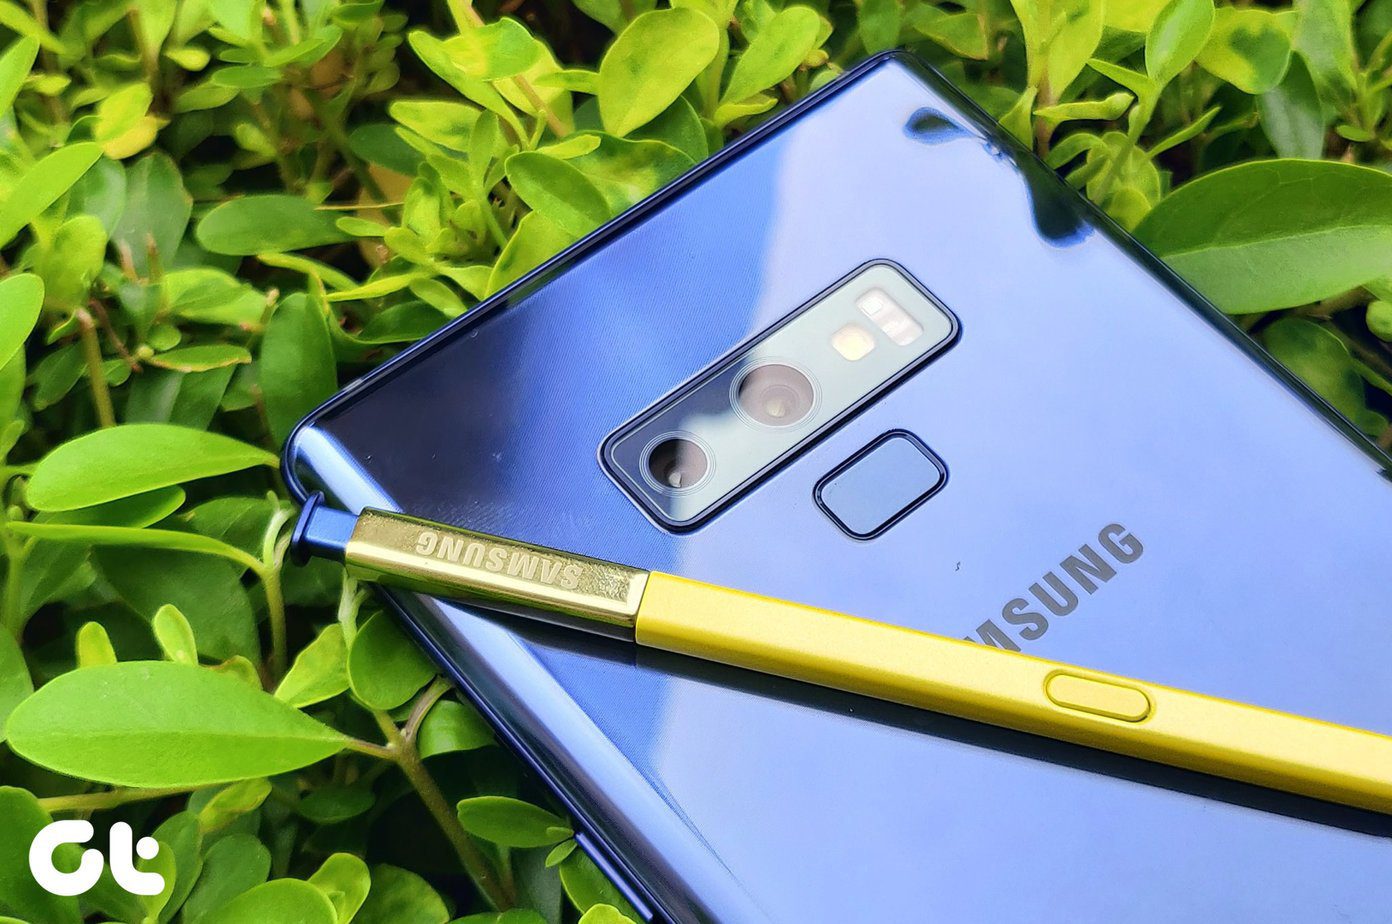 Samsung Galaxy Note 9 Images 2